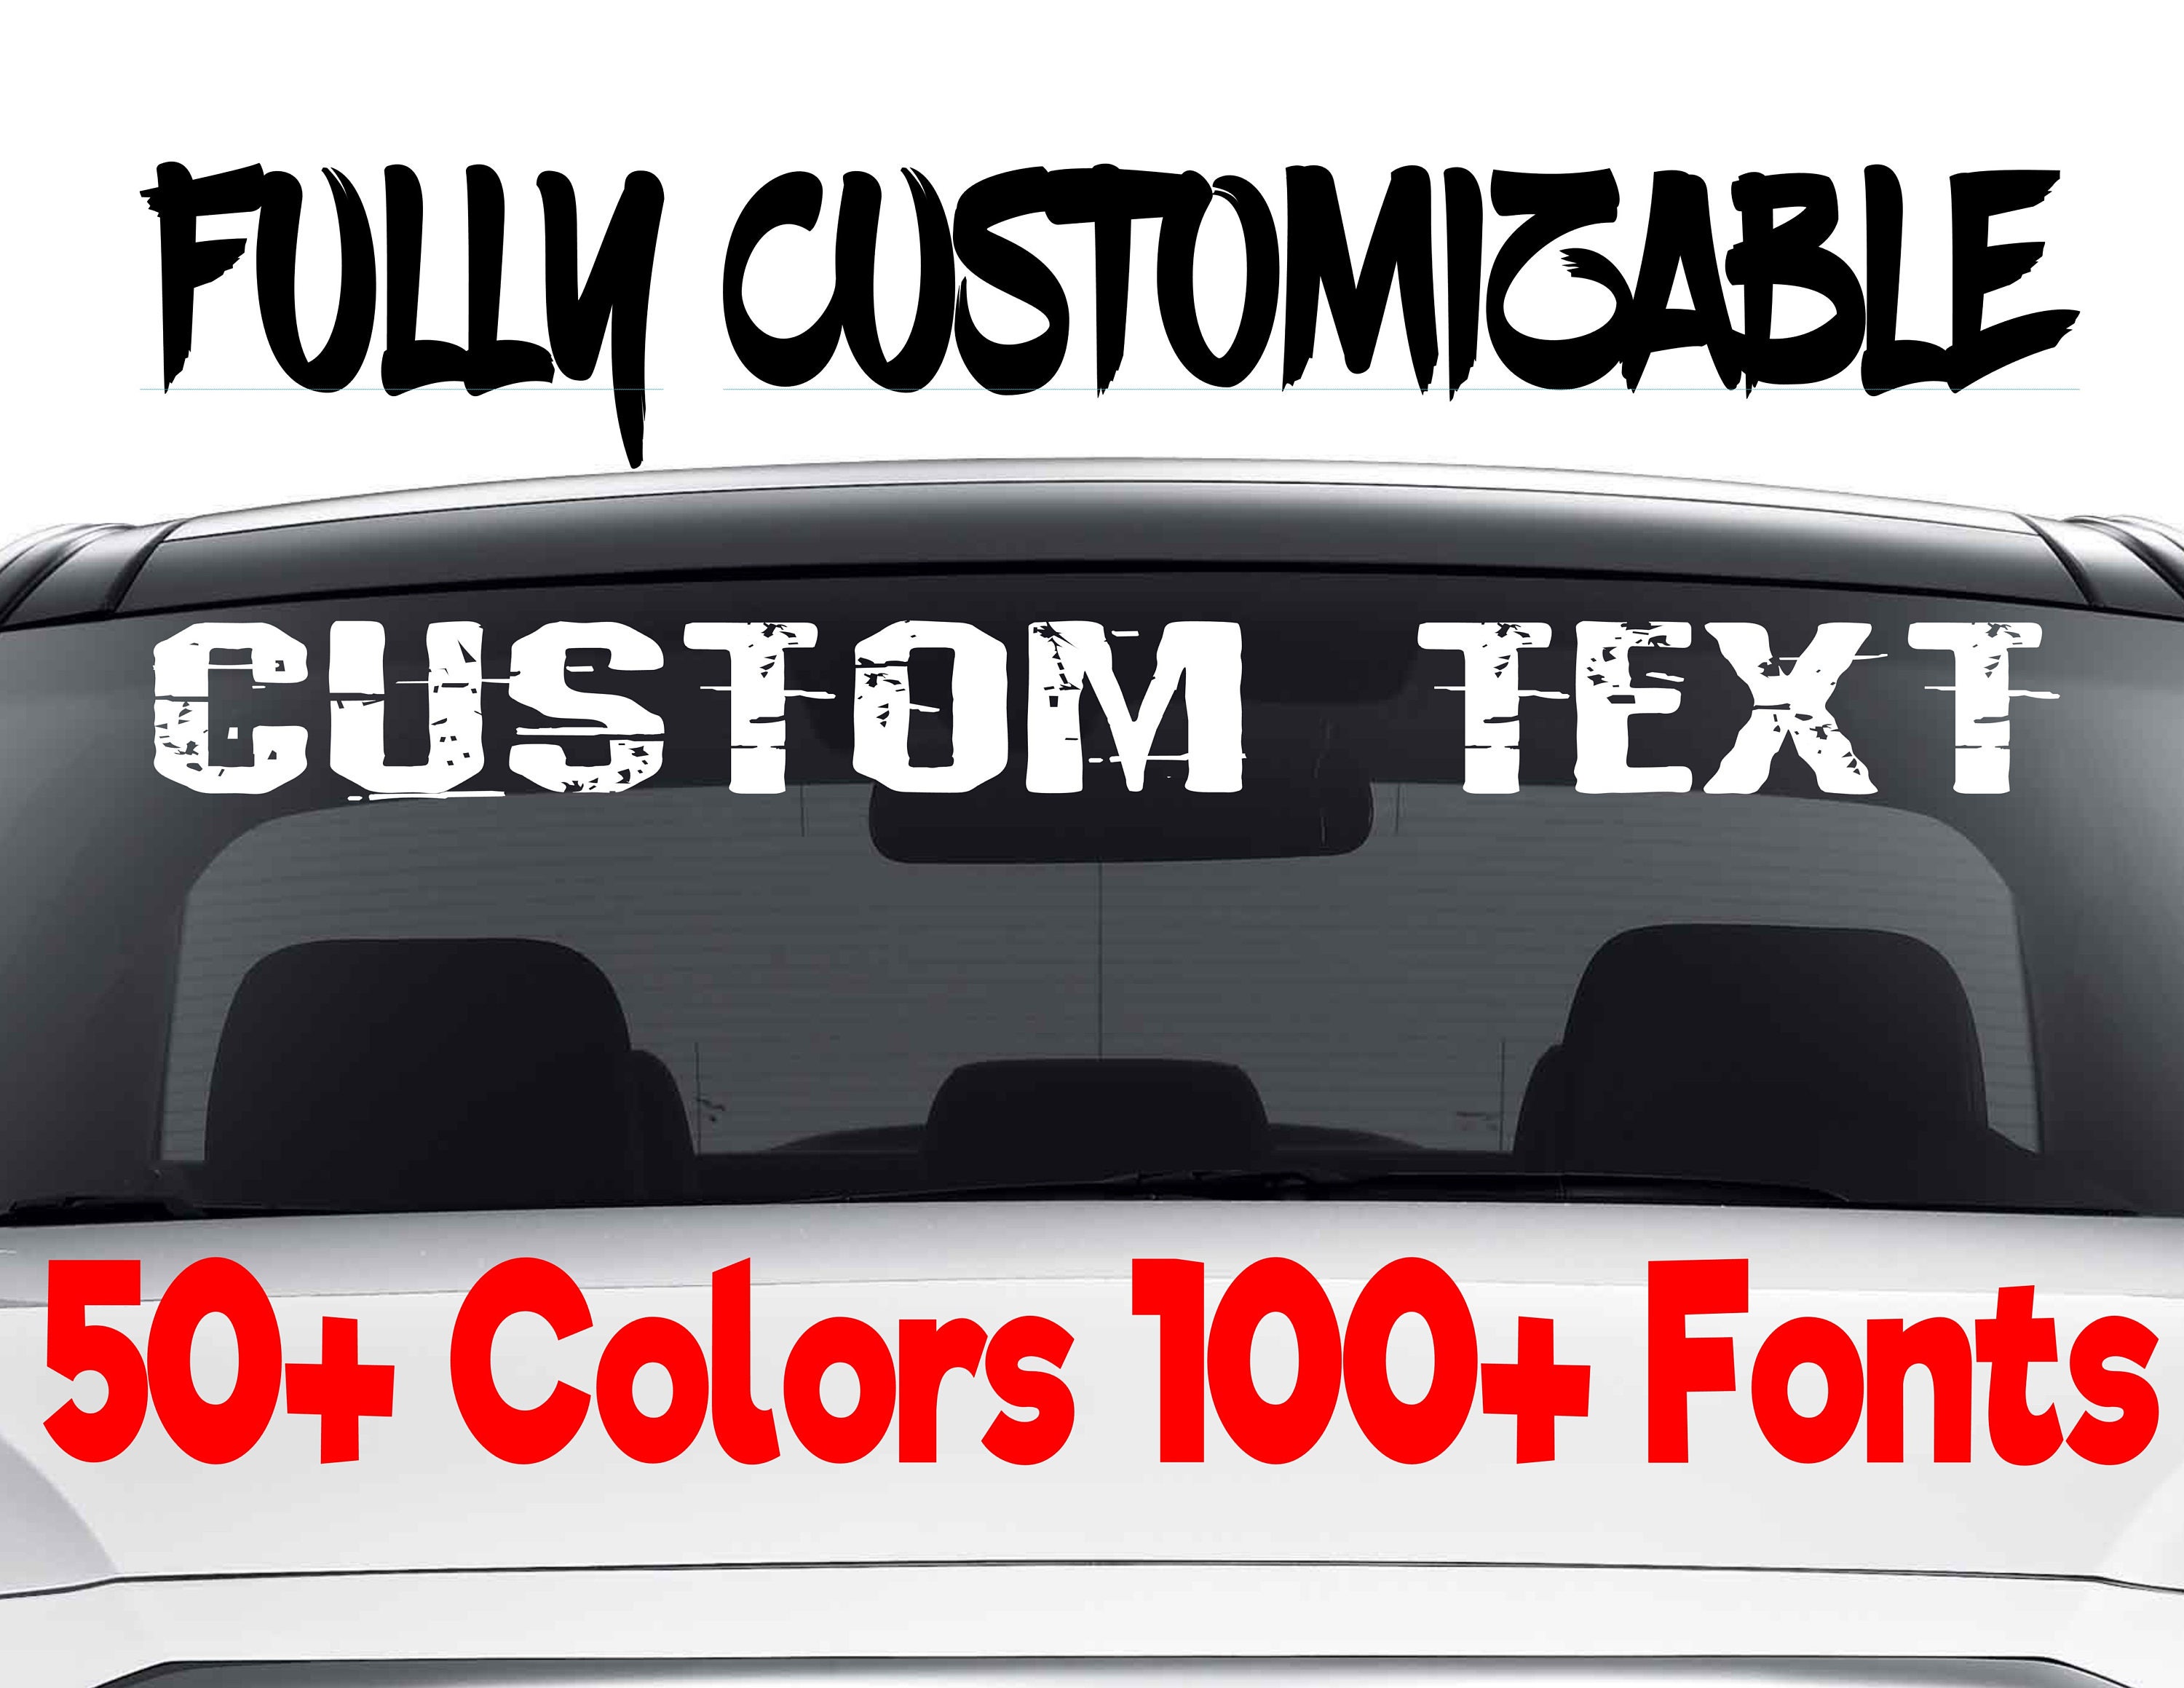 Vinyl decal sticker X2 Trucks Laptops Personalized Name FOR: Cars